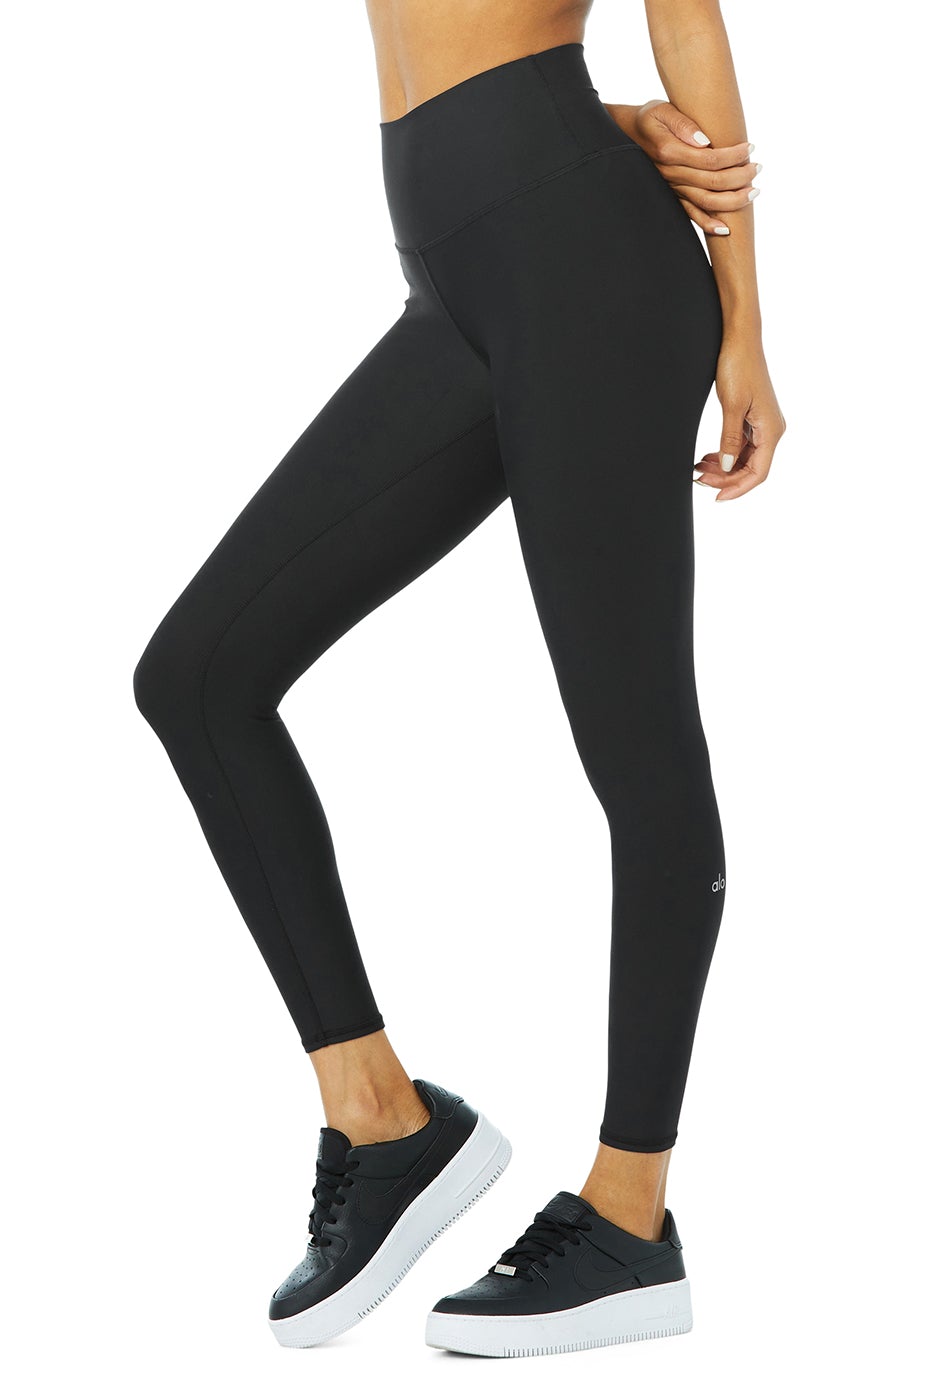 Stay warm and stylish with these trendy yoga pants